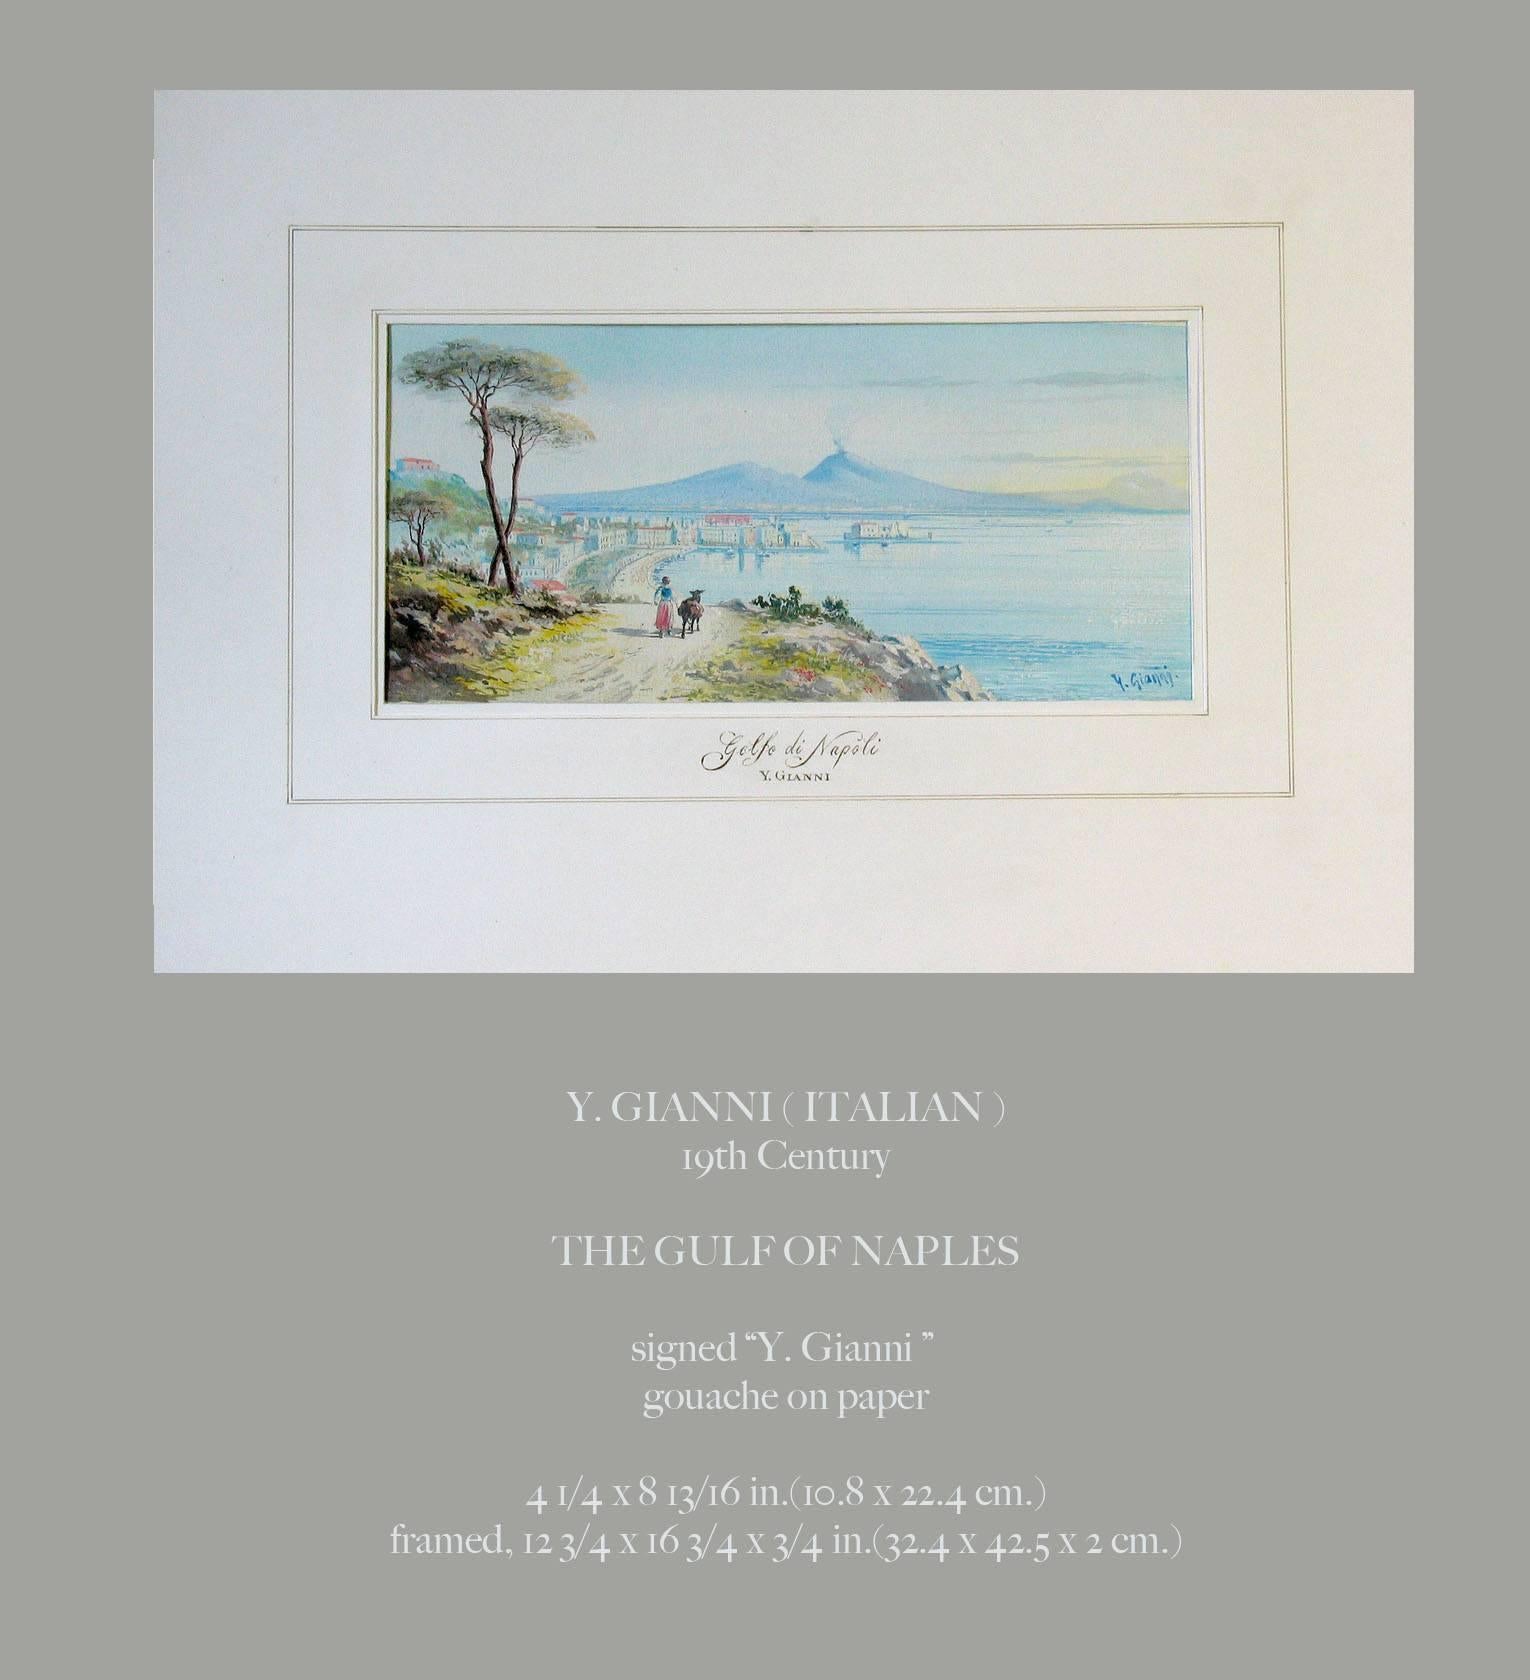 Y. Gianni (Italian) The Gulf of Naples, 19th Century. A beautiful signed 